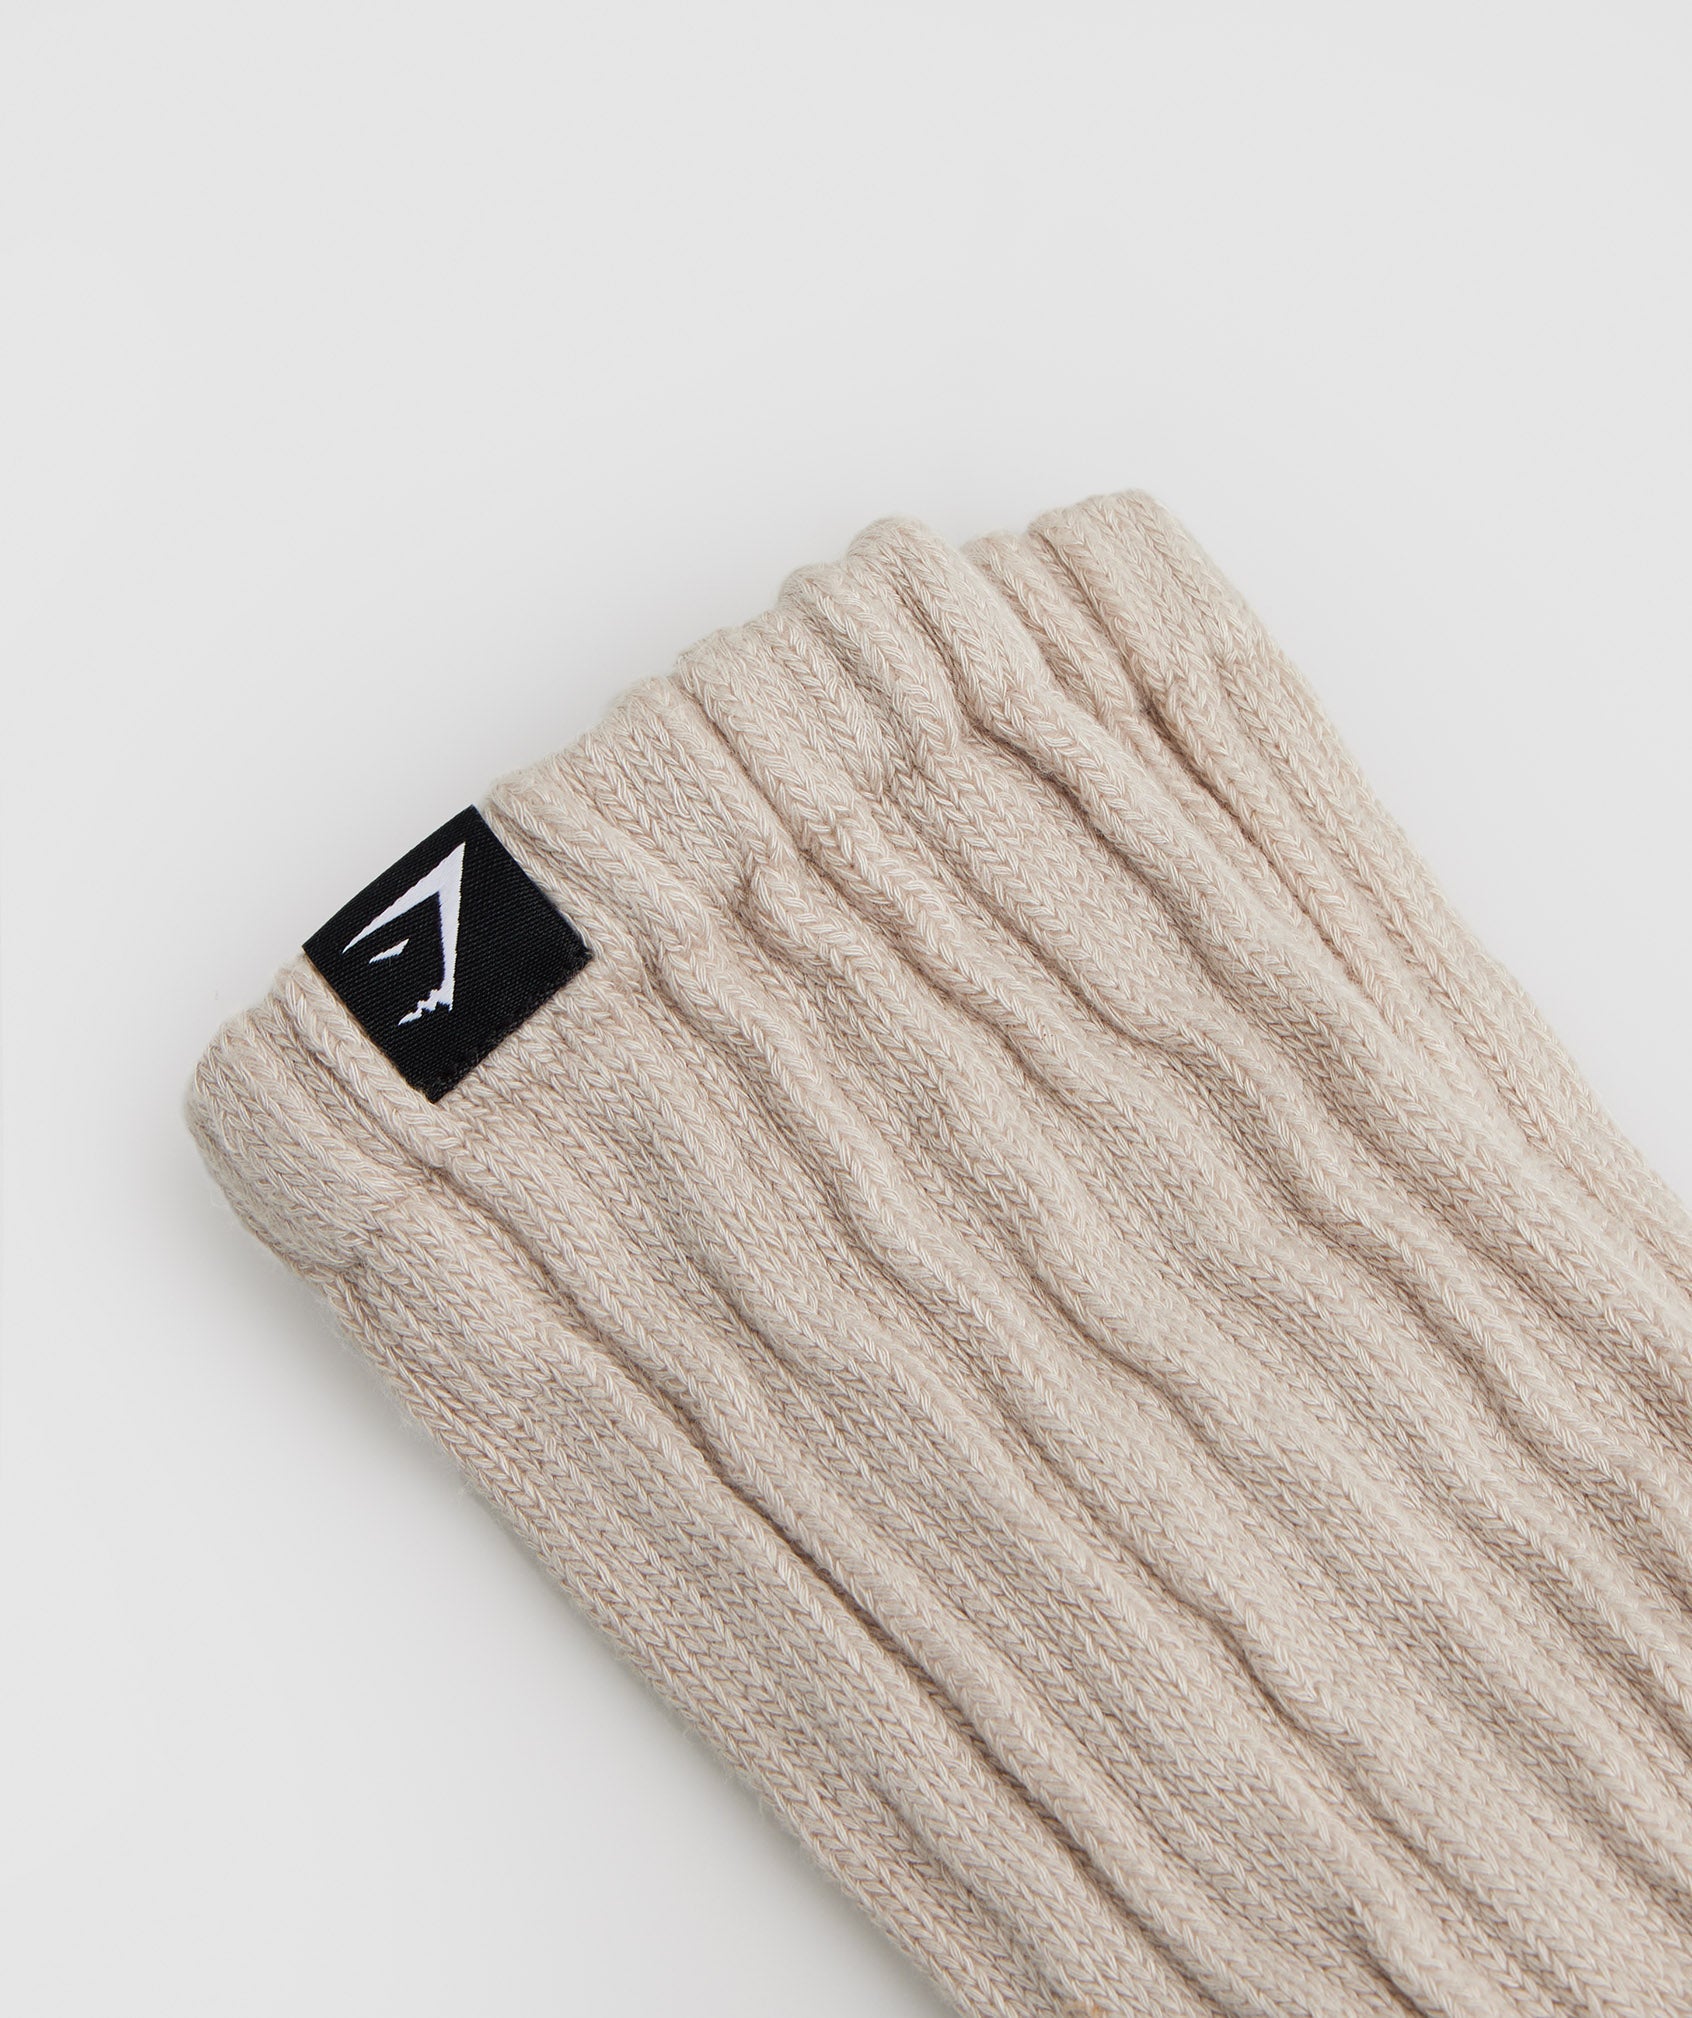 Comfy Rest Day Socks in Pebble Grey